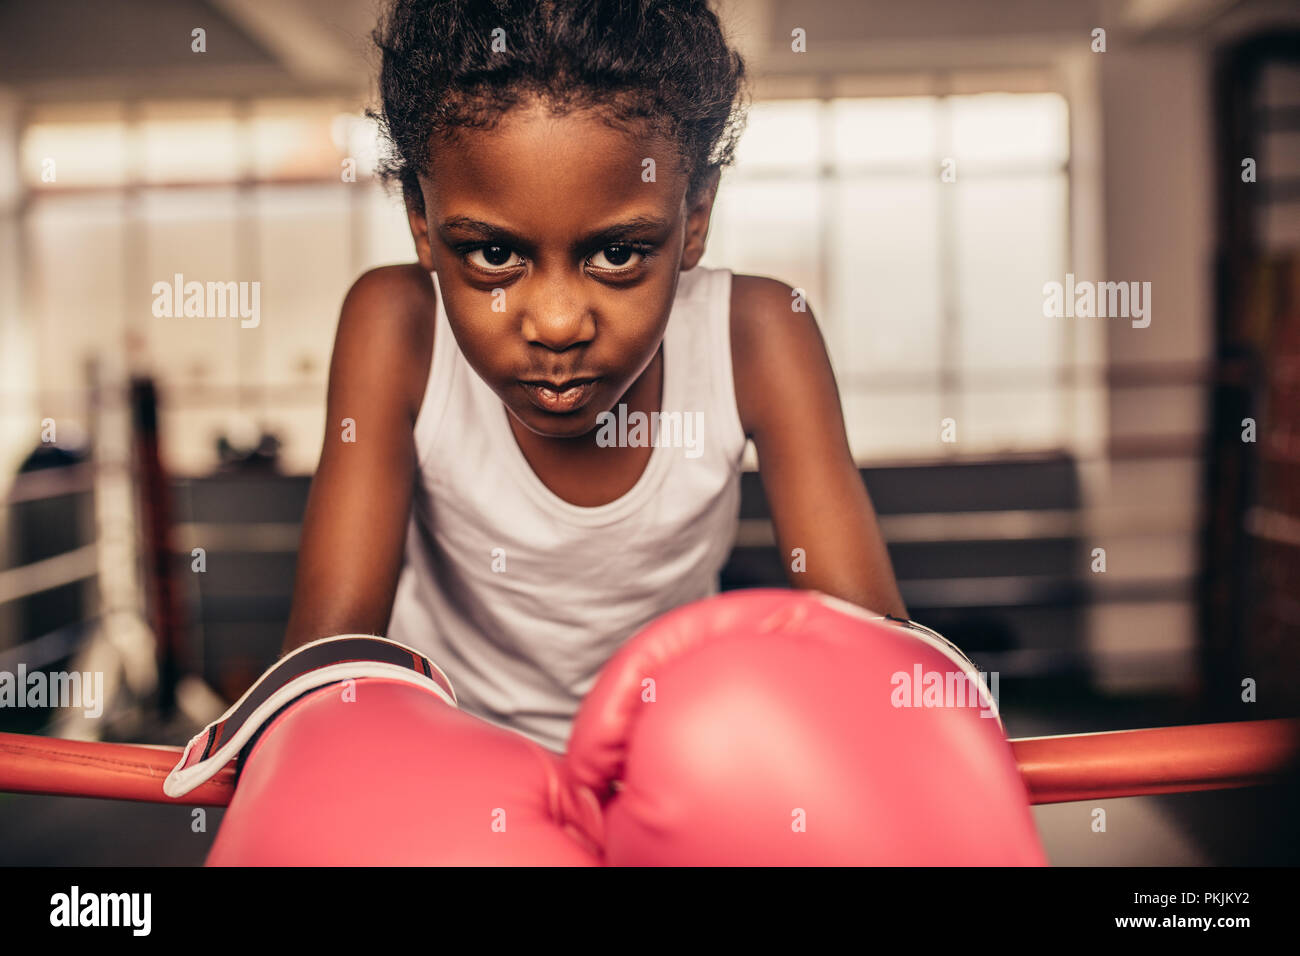 Kid wearing boxing gloves standing inside a boxing ring. Boxer kid resting her hands on boxing ring with determination and focus in her eyes. Stock Photo